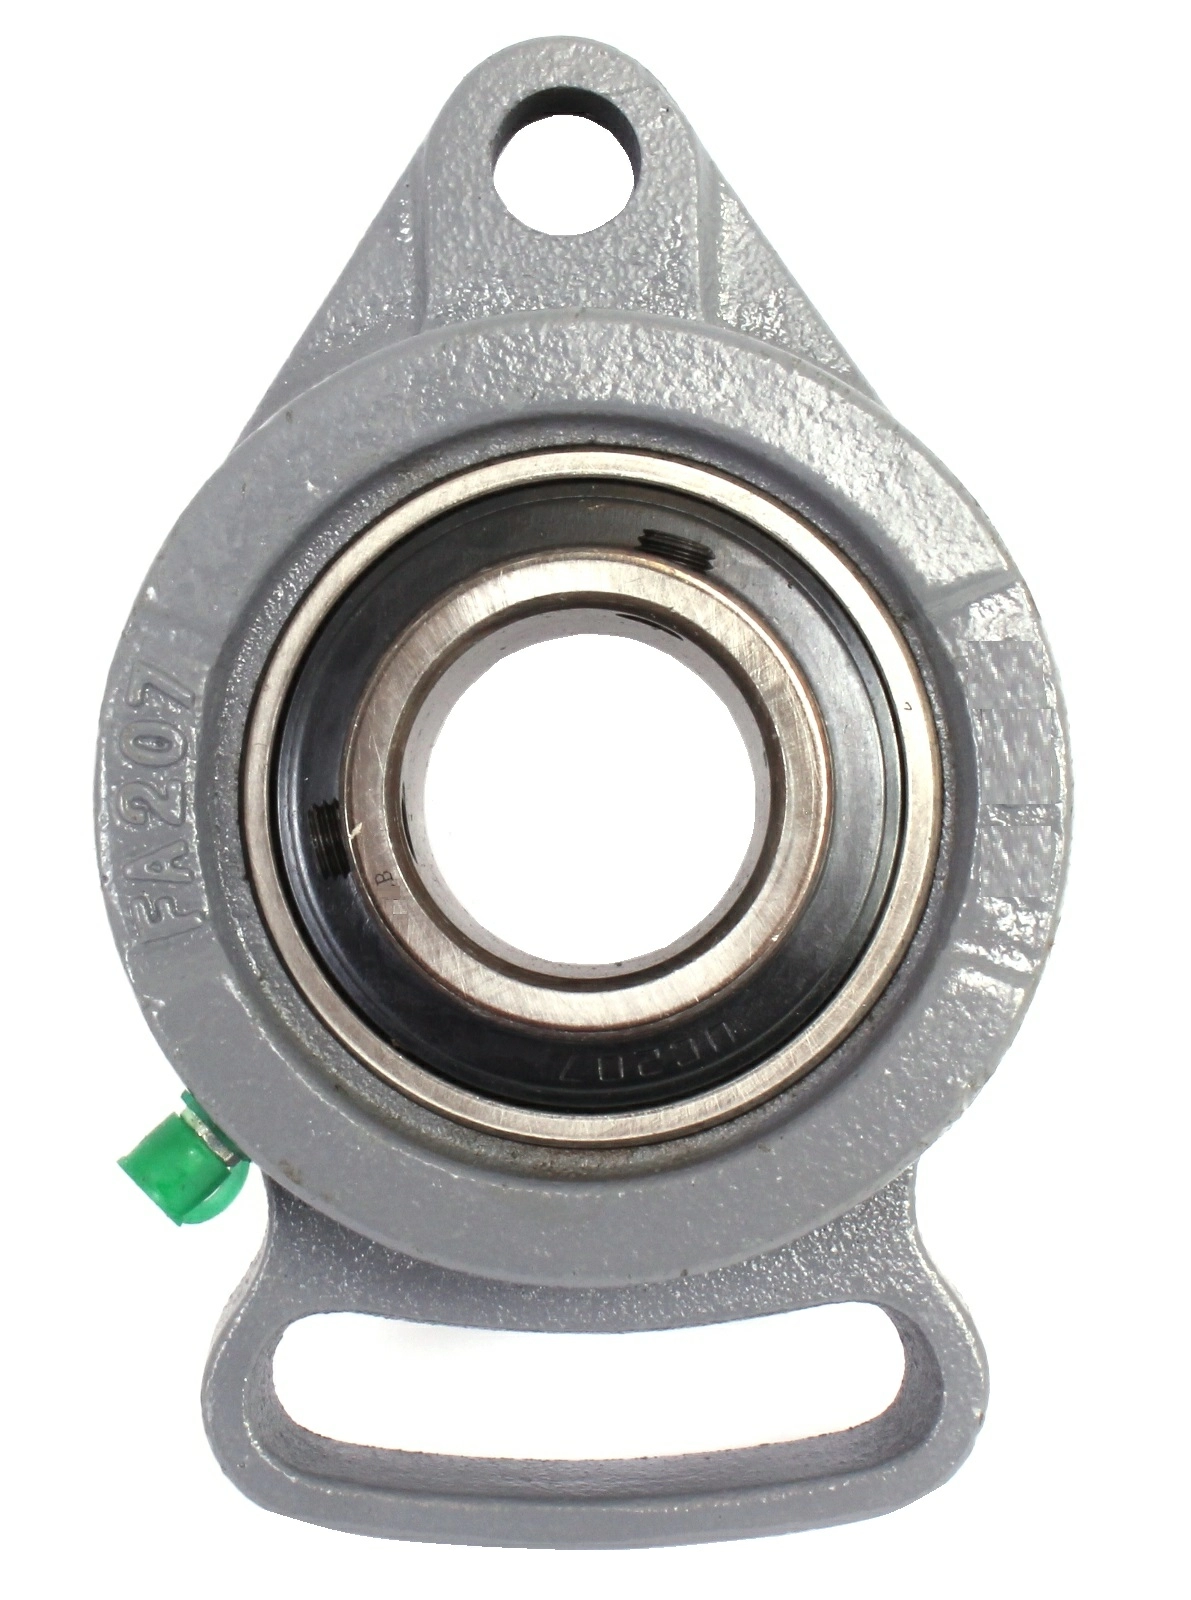 Adjustable rhombic flanged type, Cast Iron Housing